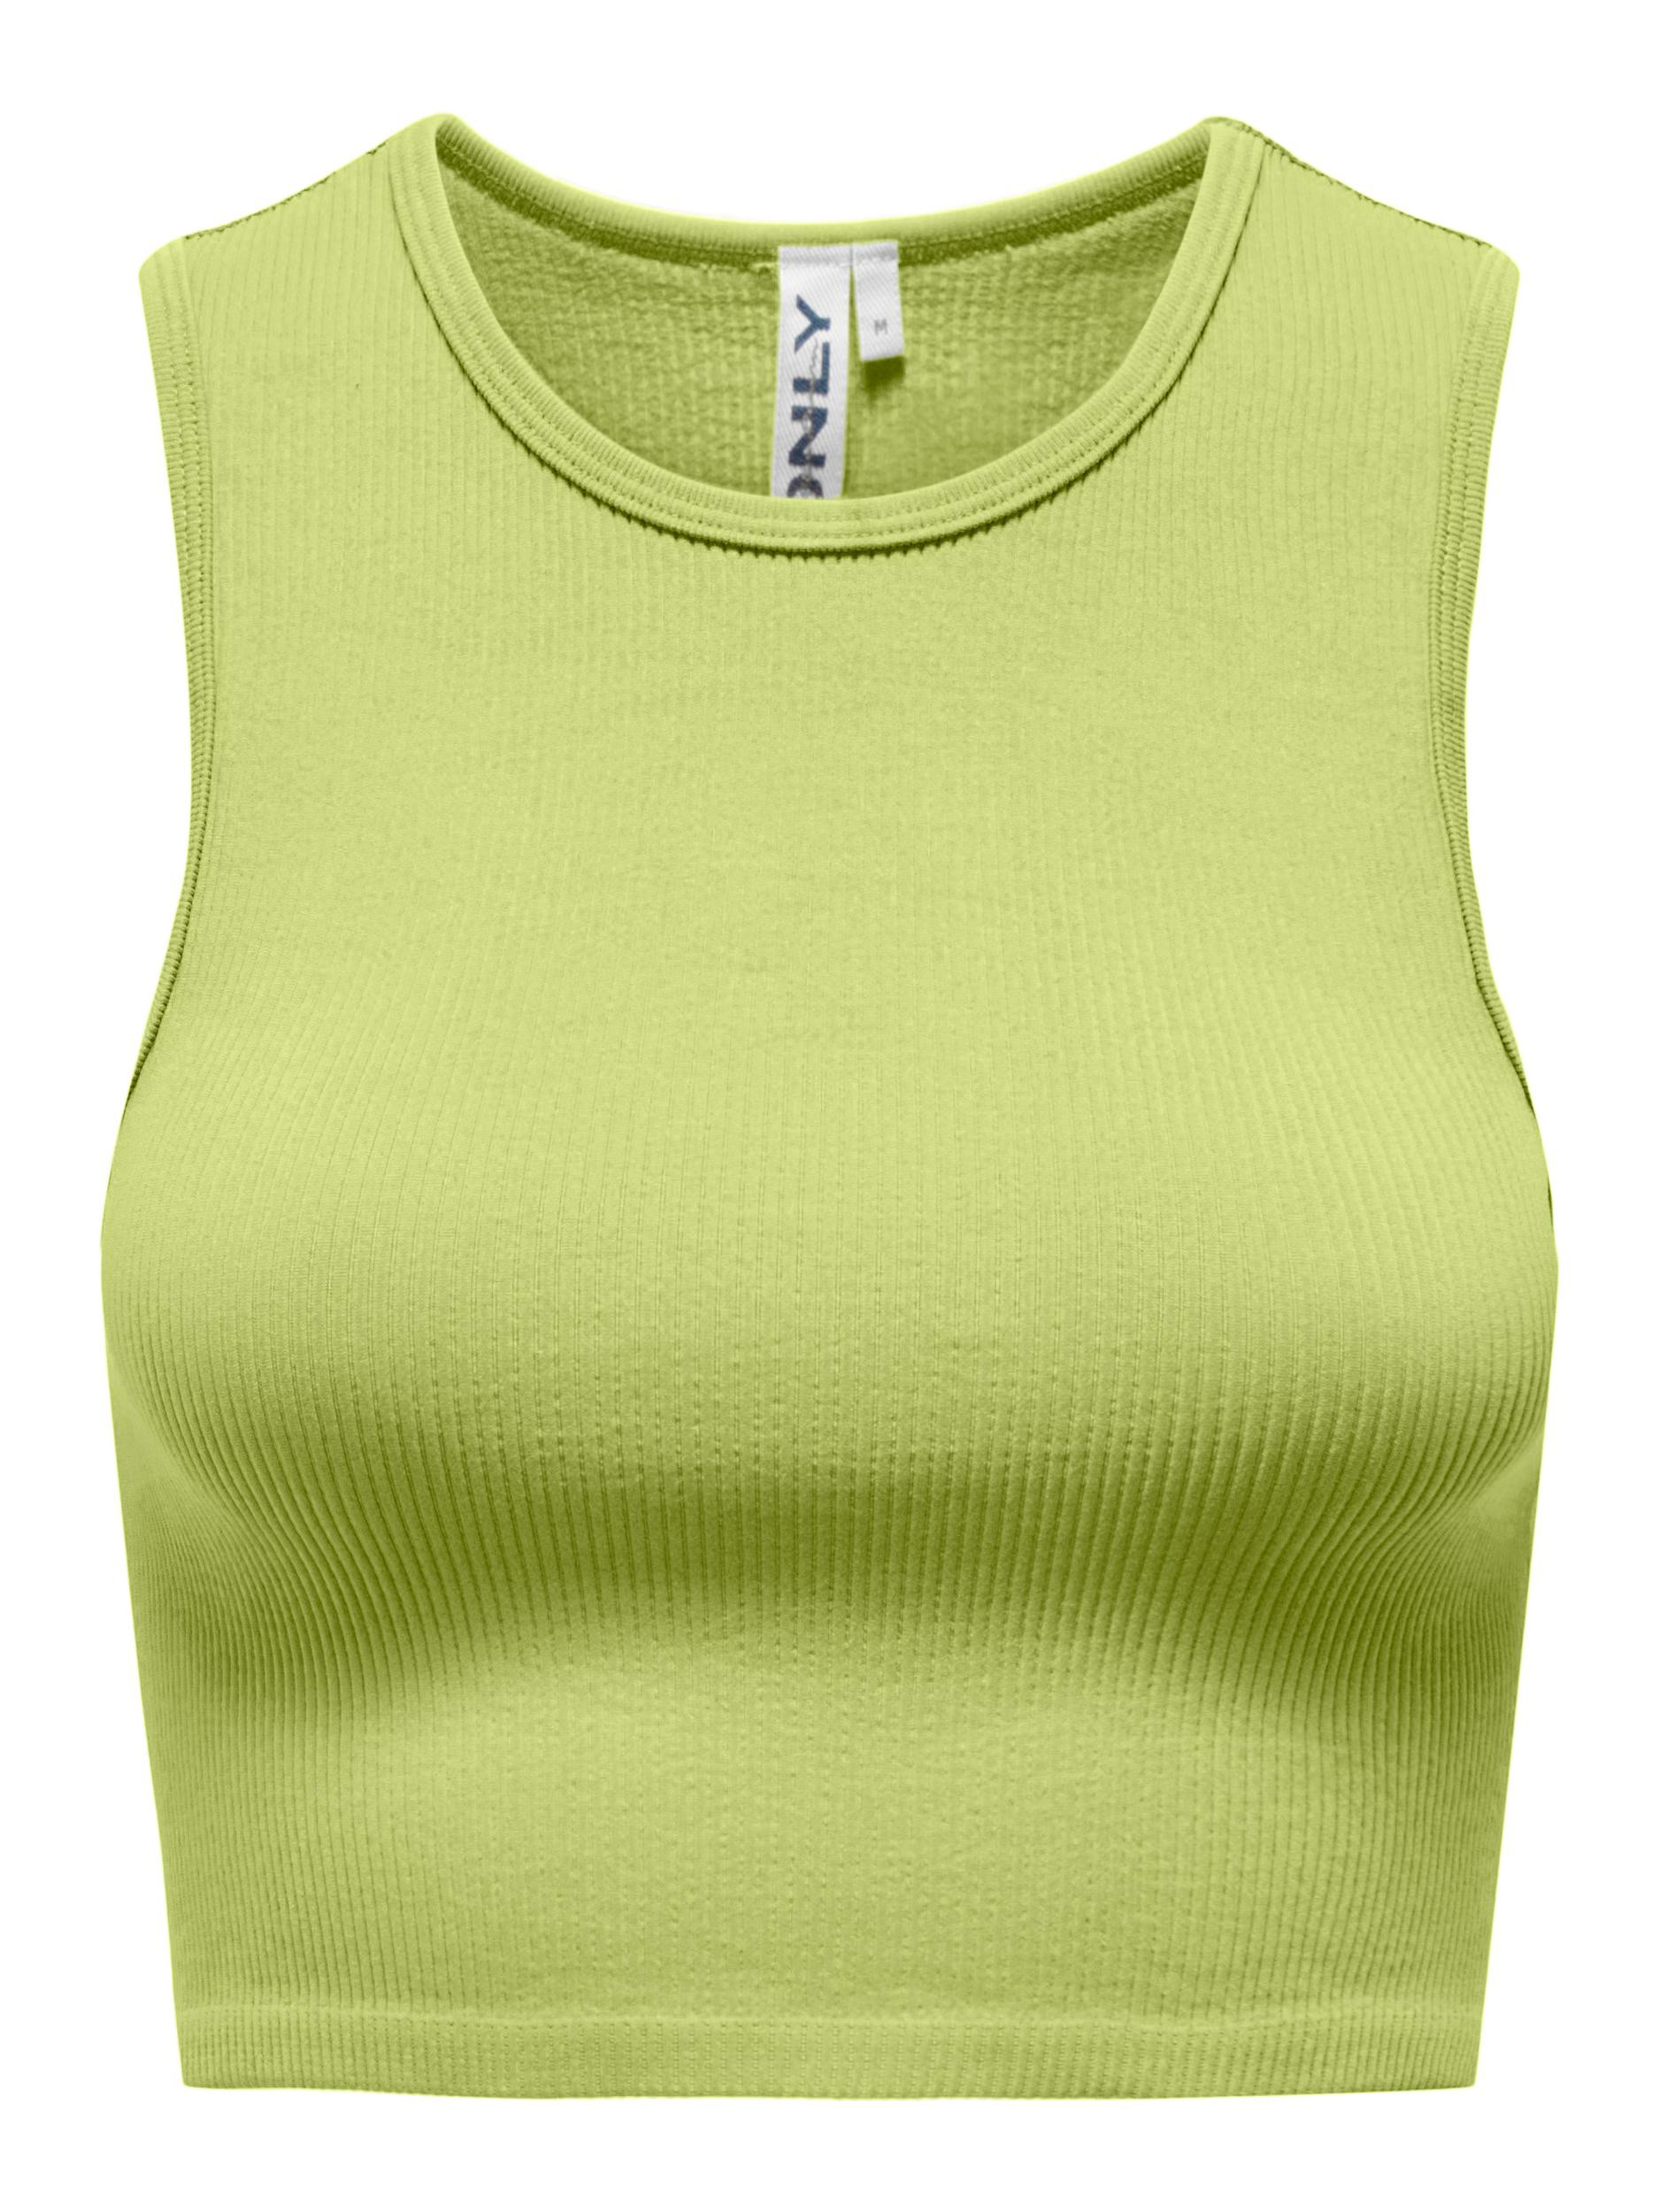 Only - Stretch-fit top, Lime Green, large image number 0